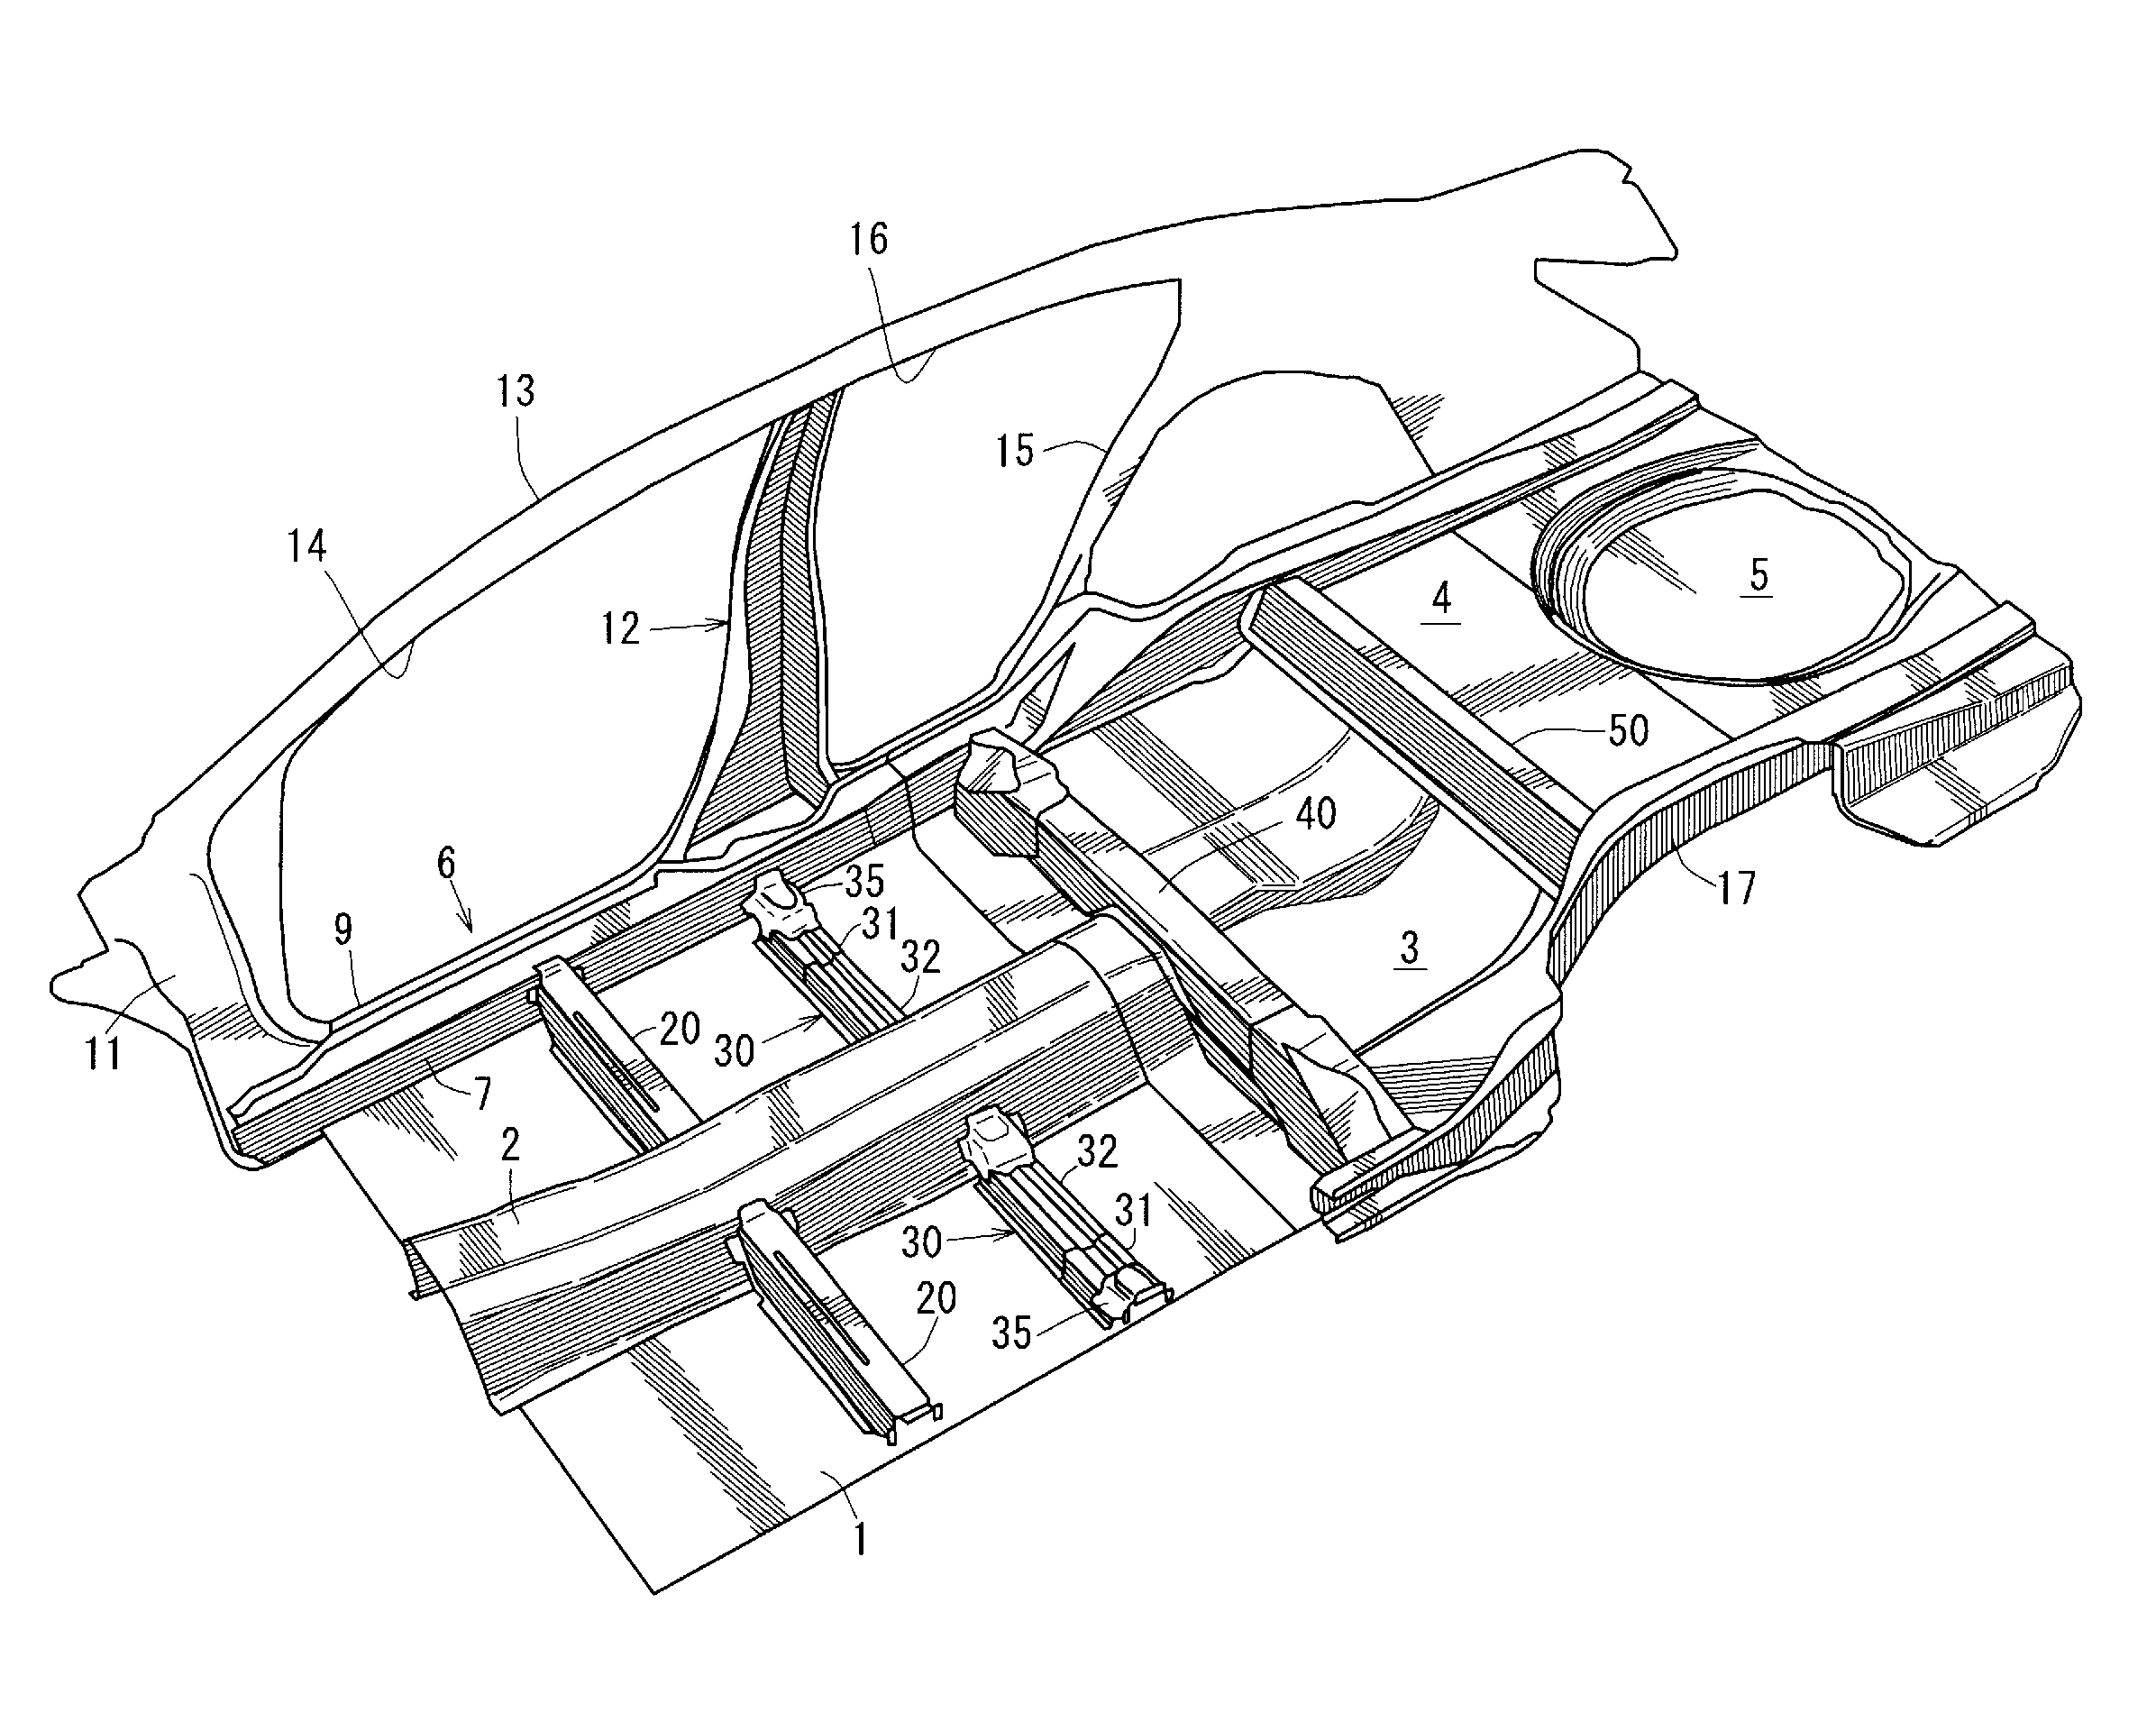 Lower vehicle-body structure of vehicle